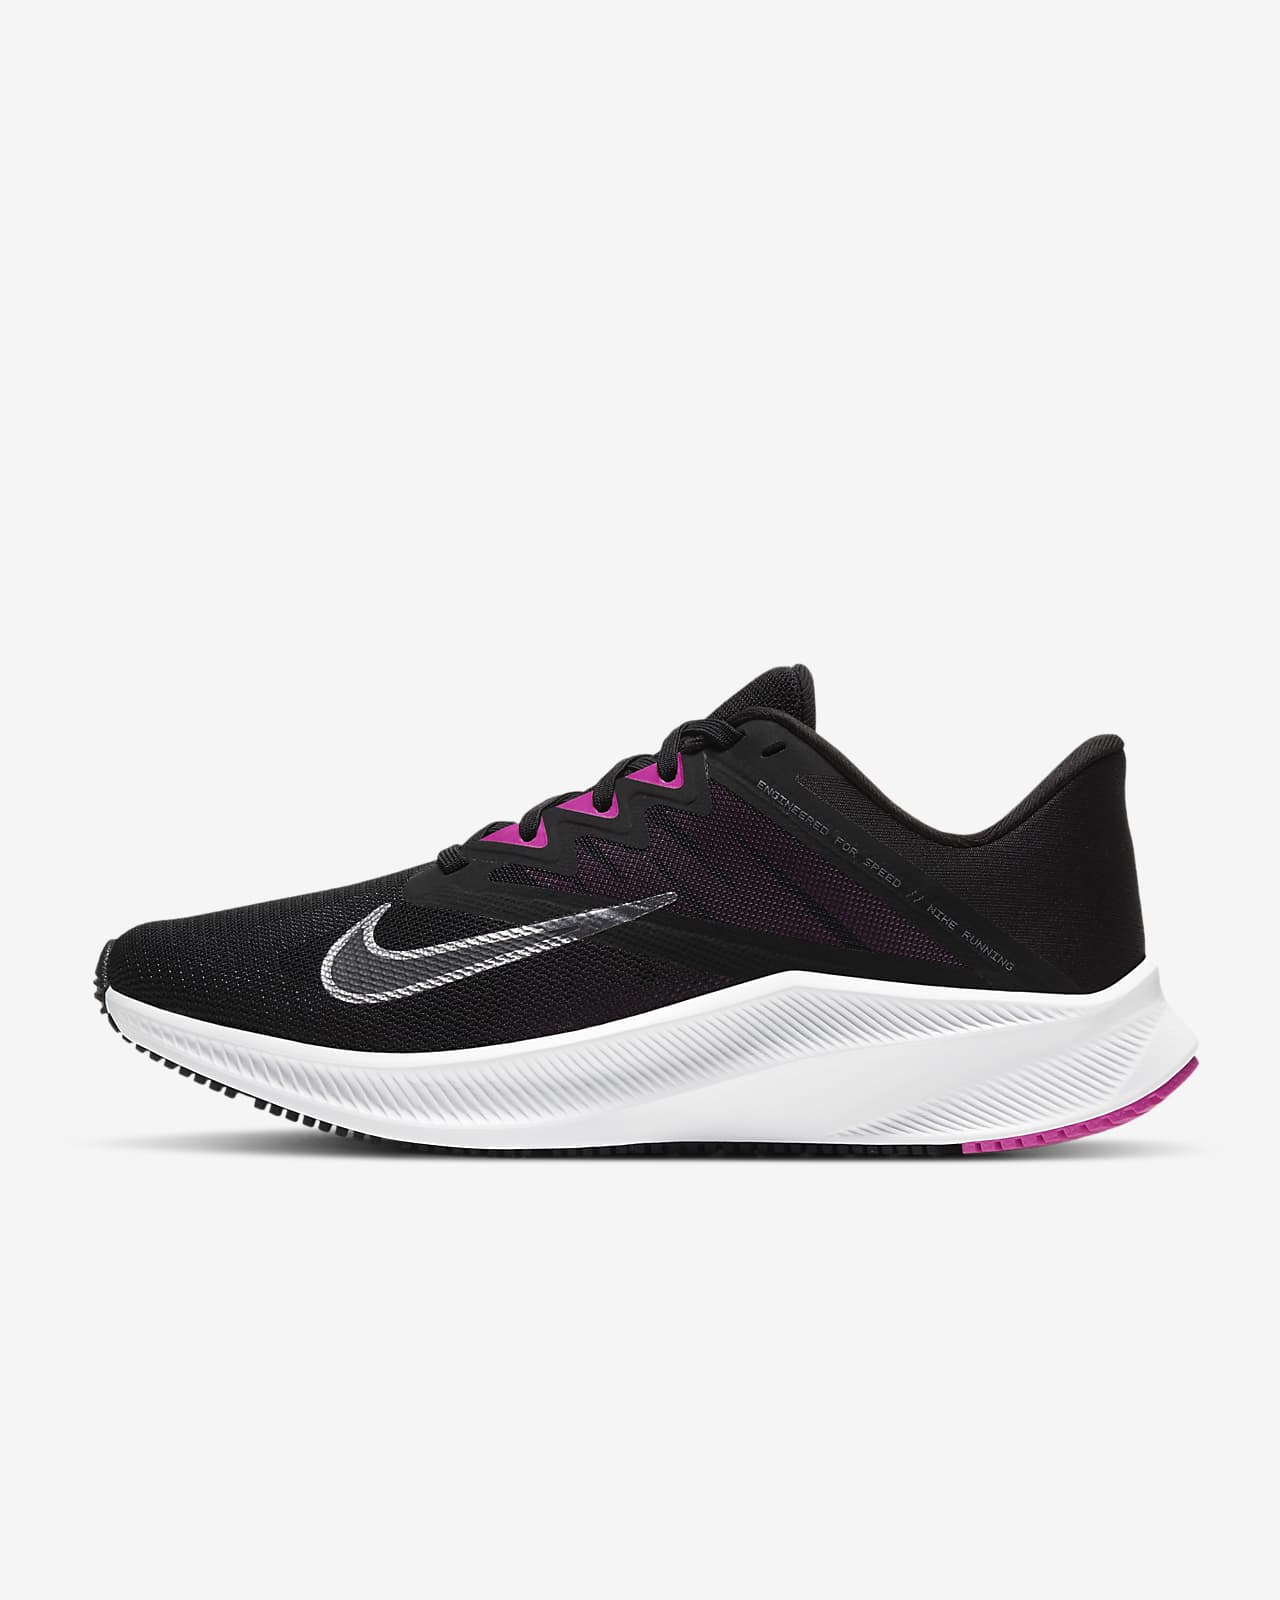 nike pink and grey running shoes